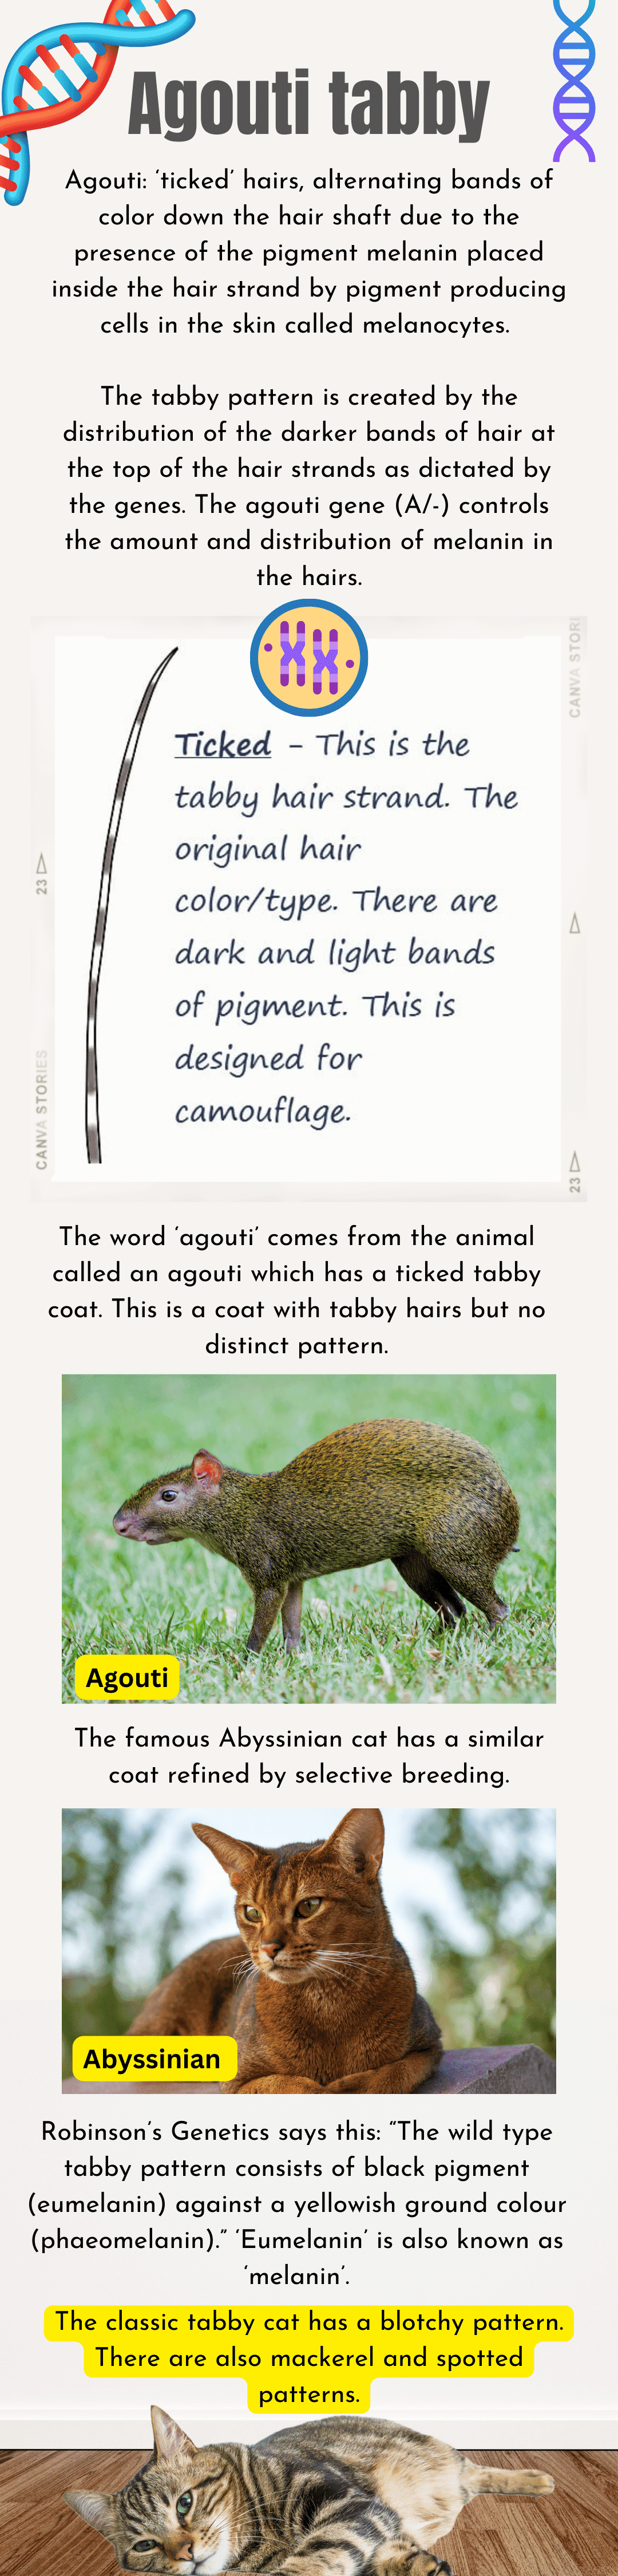 Infographic on the agouti tabby pattern and genetics.